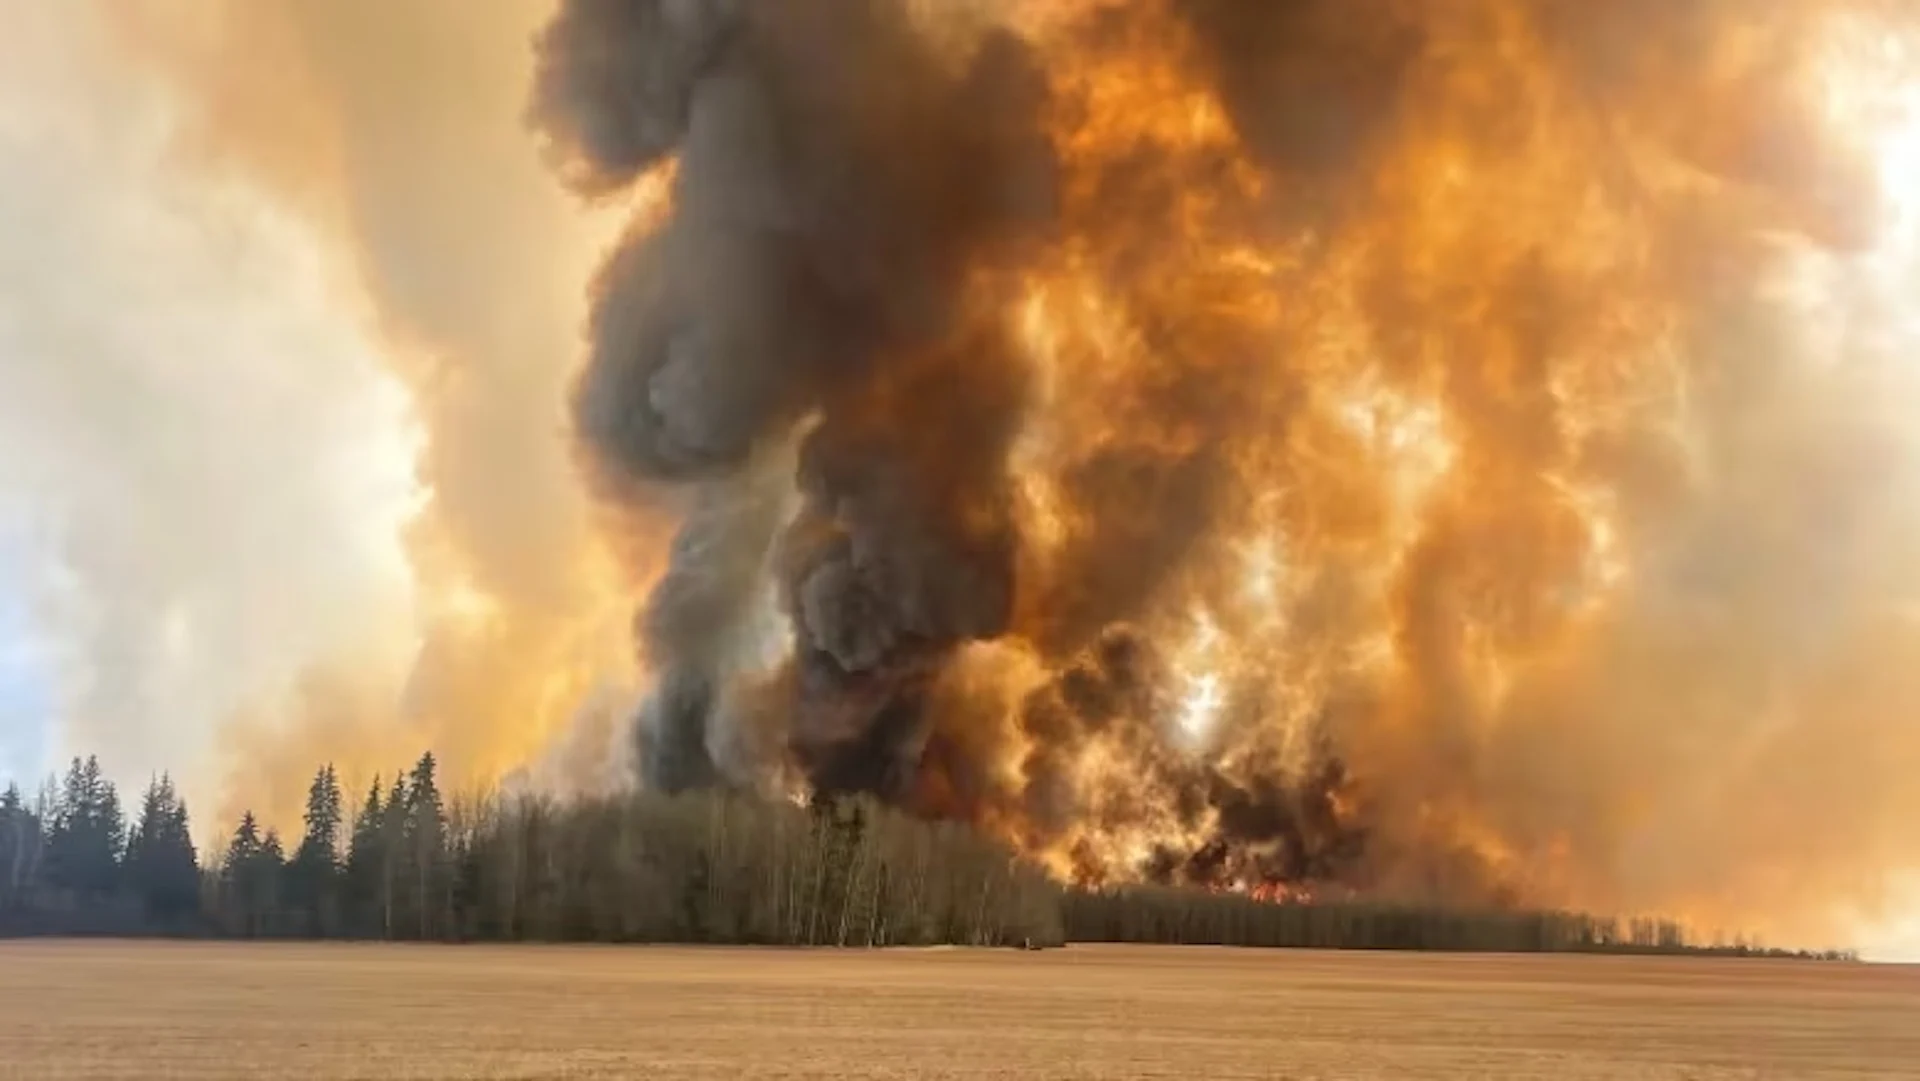 Wildfires west of Edmonton continue to threaten rural homes, hamlets